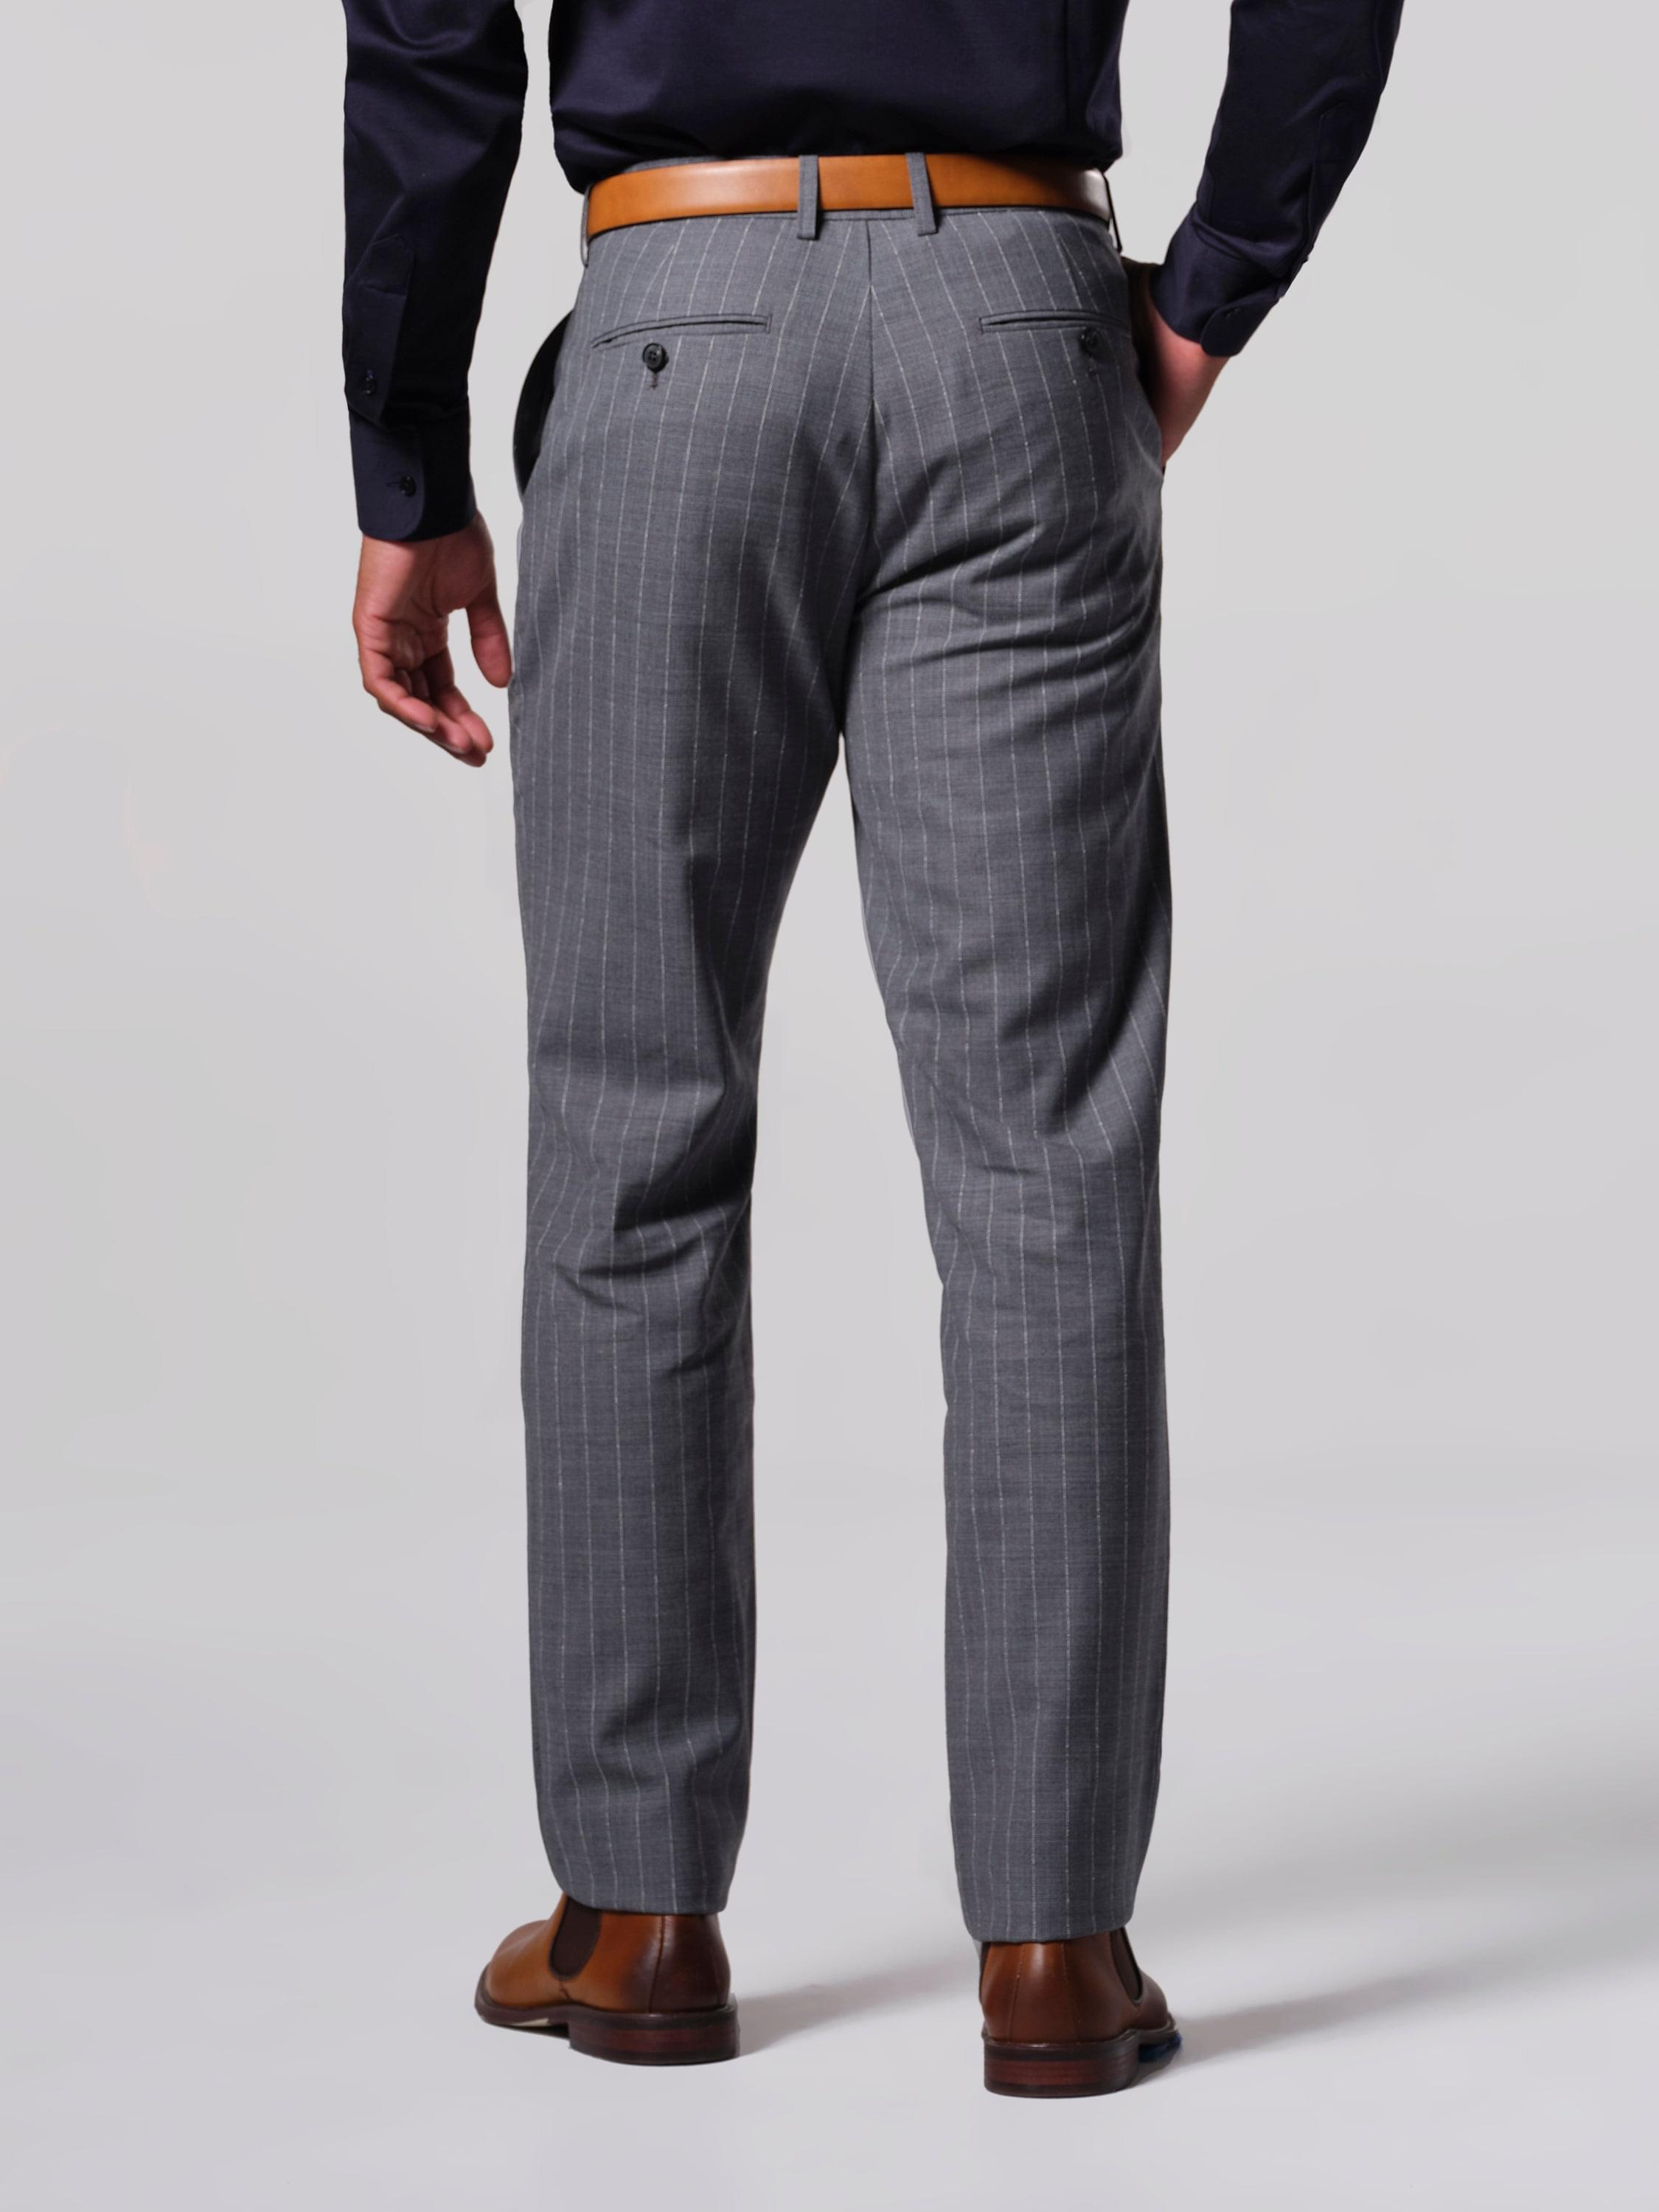 Pleated Striped Formal Trousers